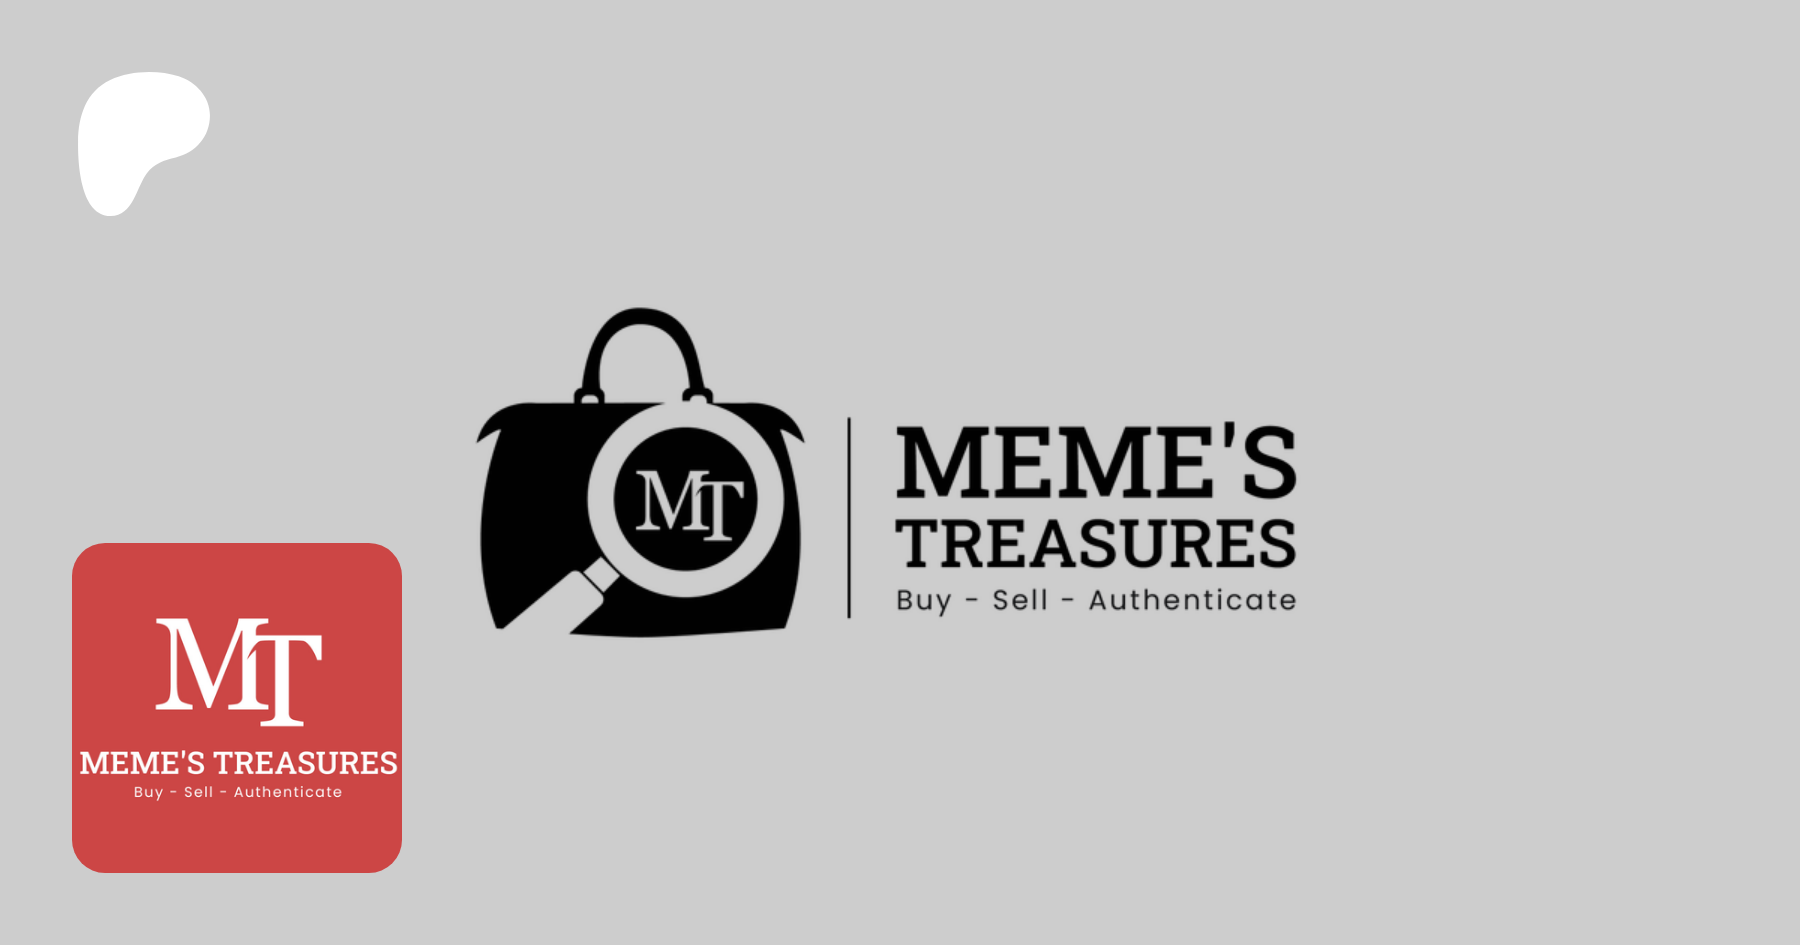 Memes Treasures Sales and Authentication Service